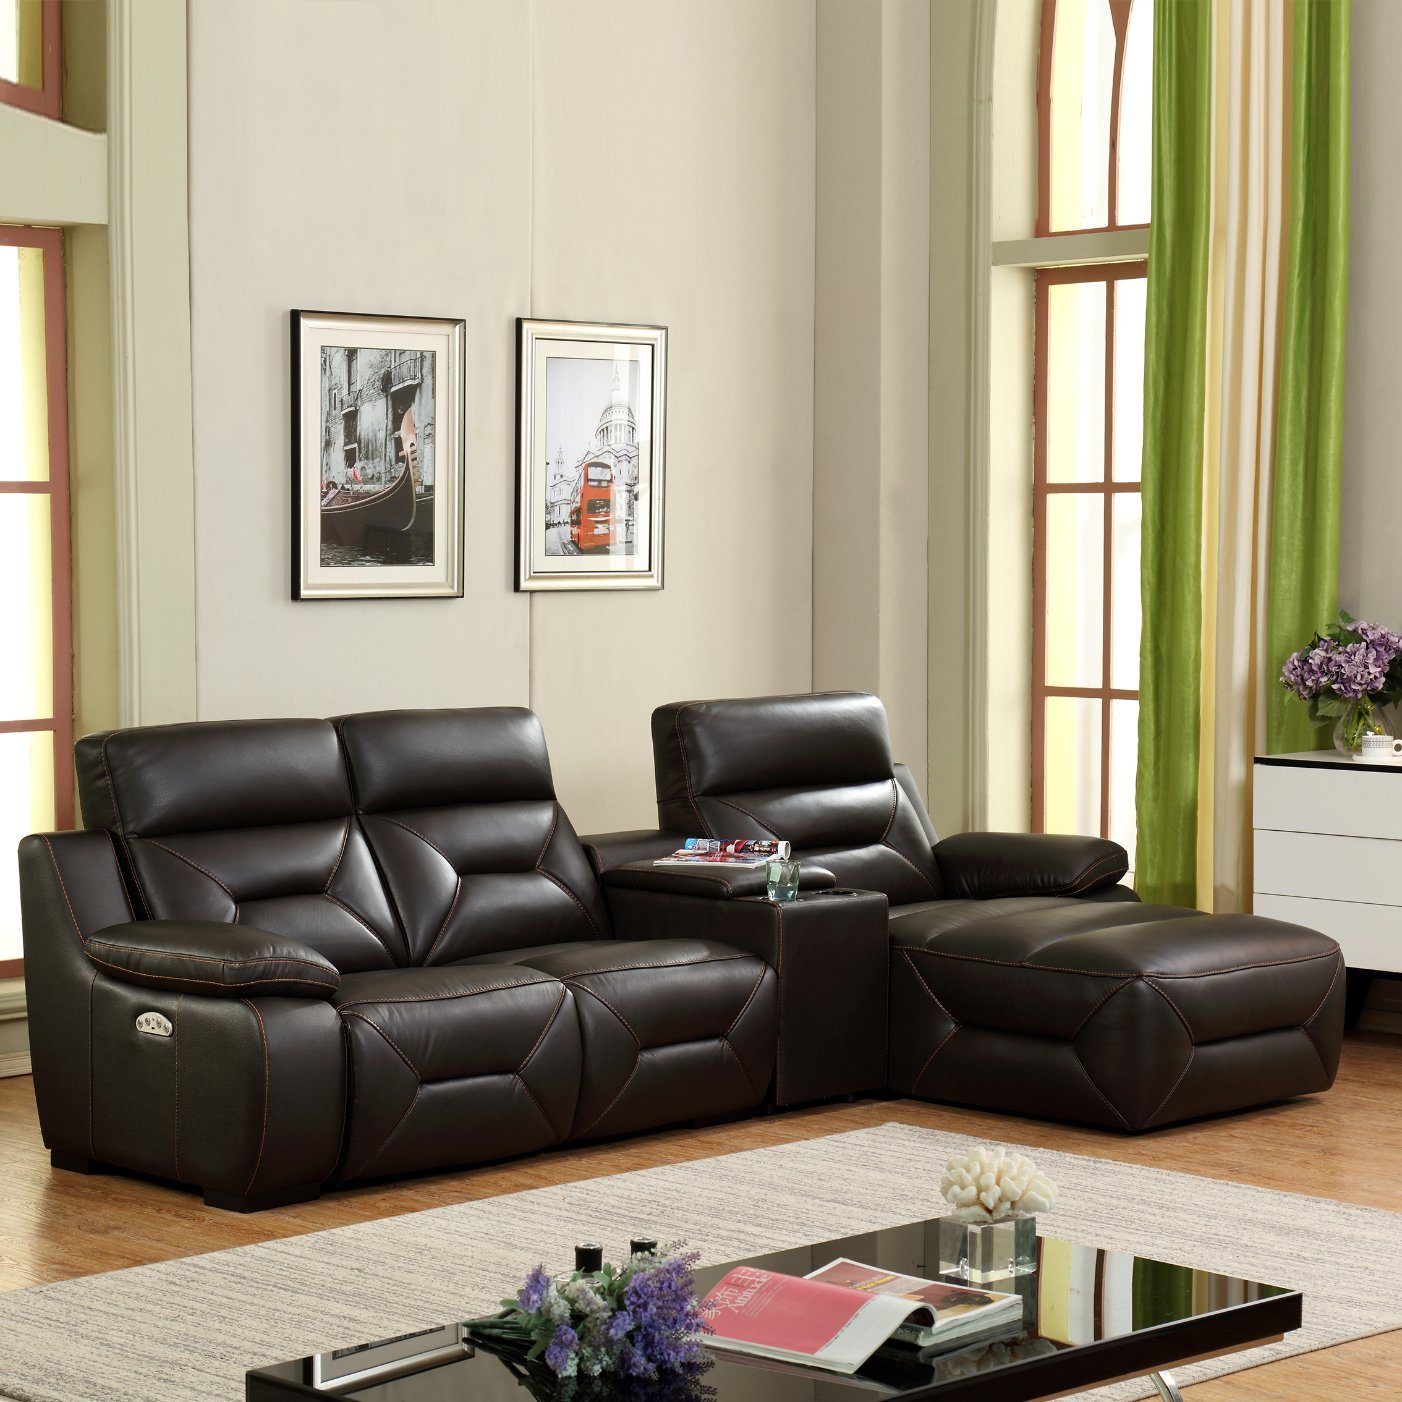 2022 Hot Sale Living Room Sectional Fabric Recliner Sofa